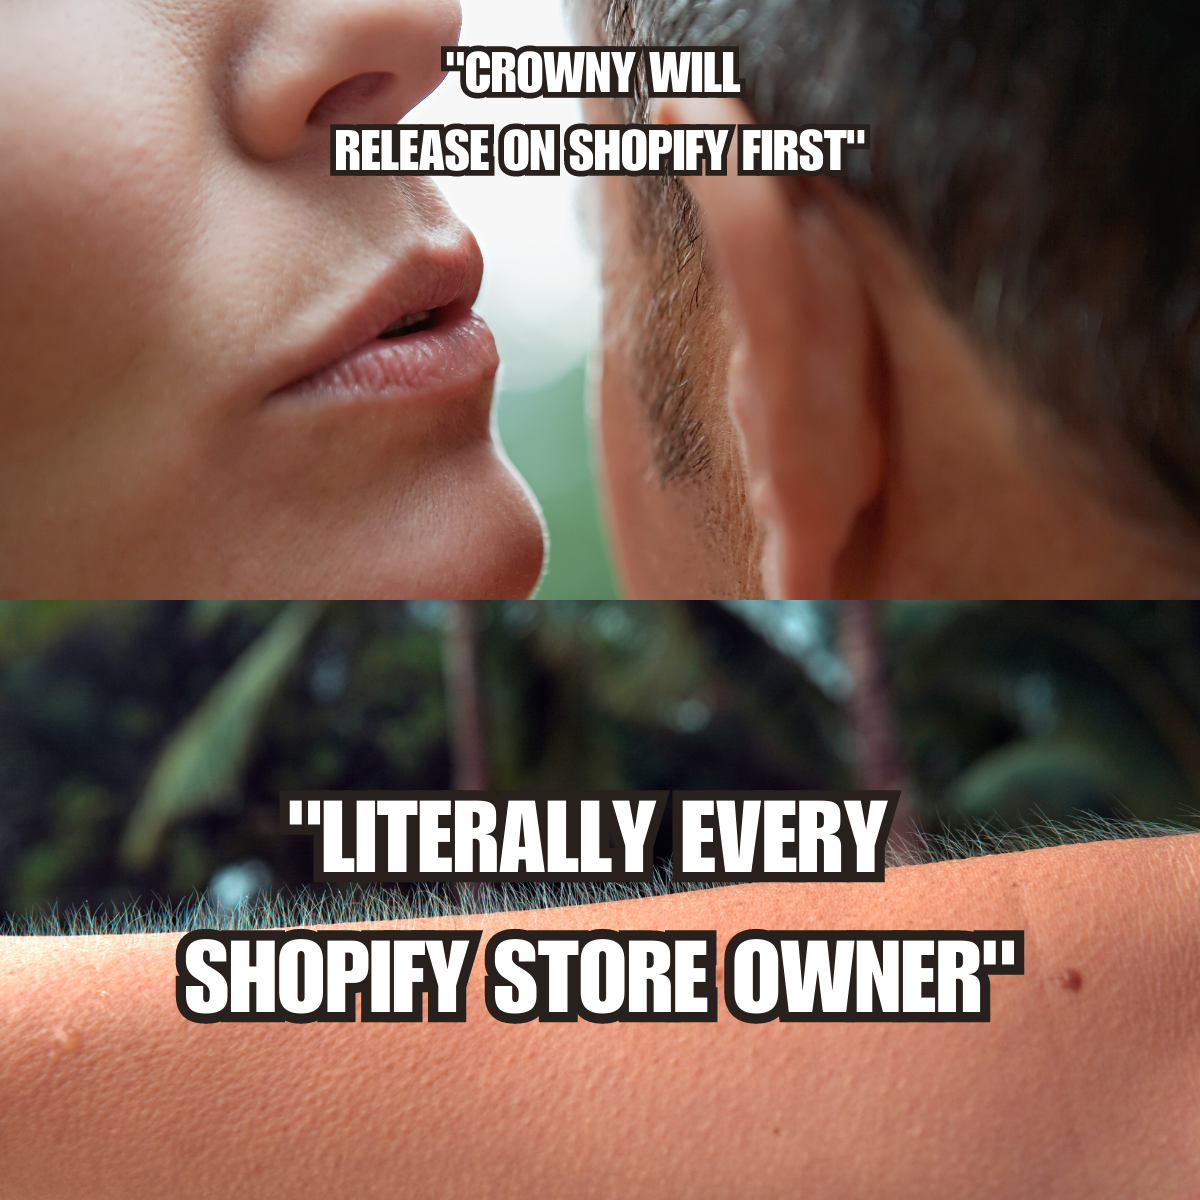 crowny will release on shopify first meme